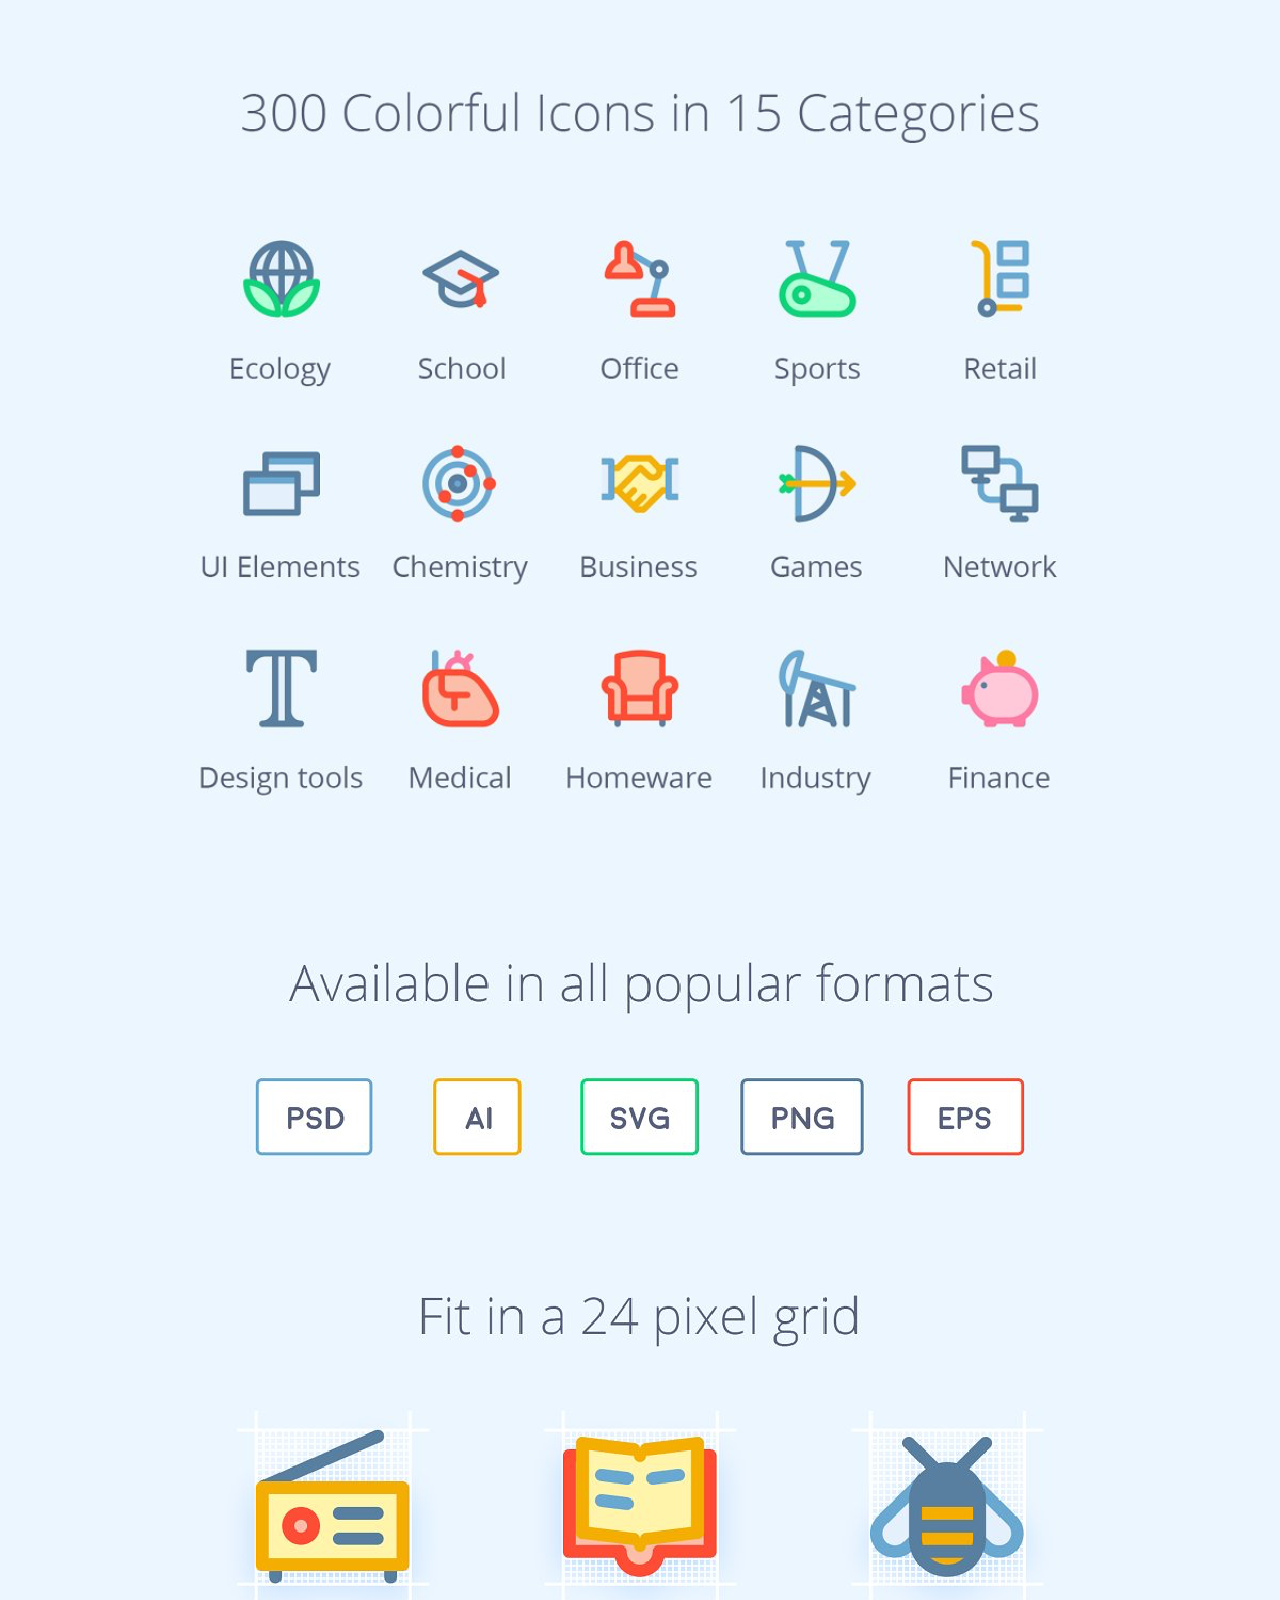 300 colorful icons pinterest image.